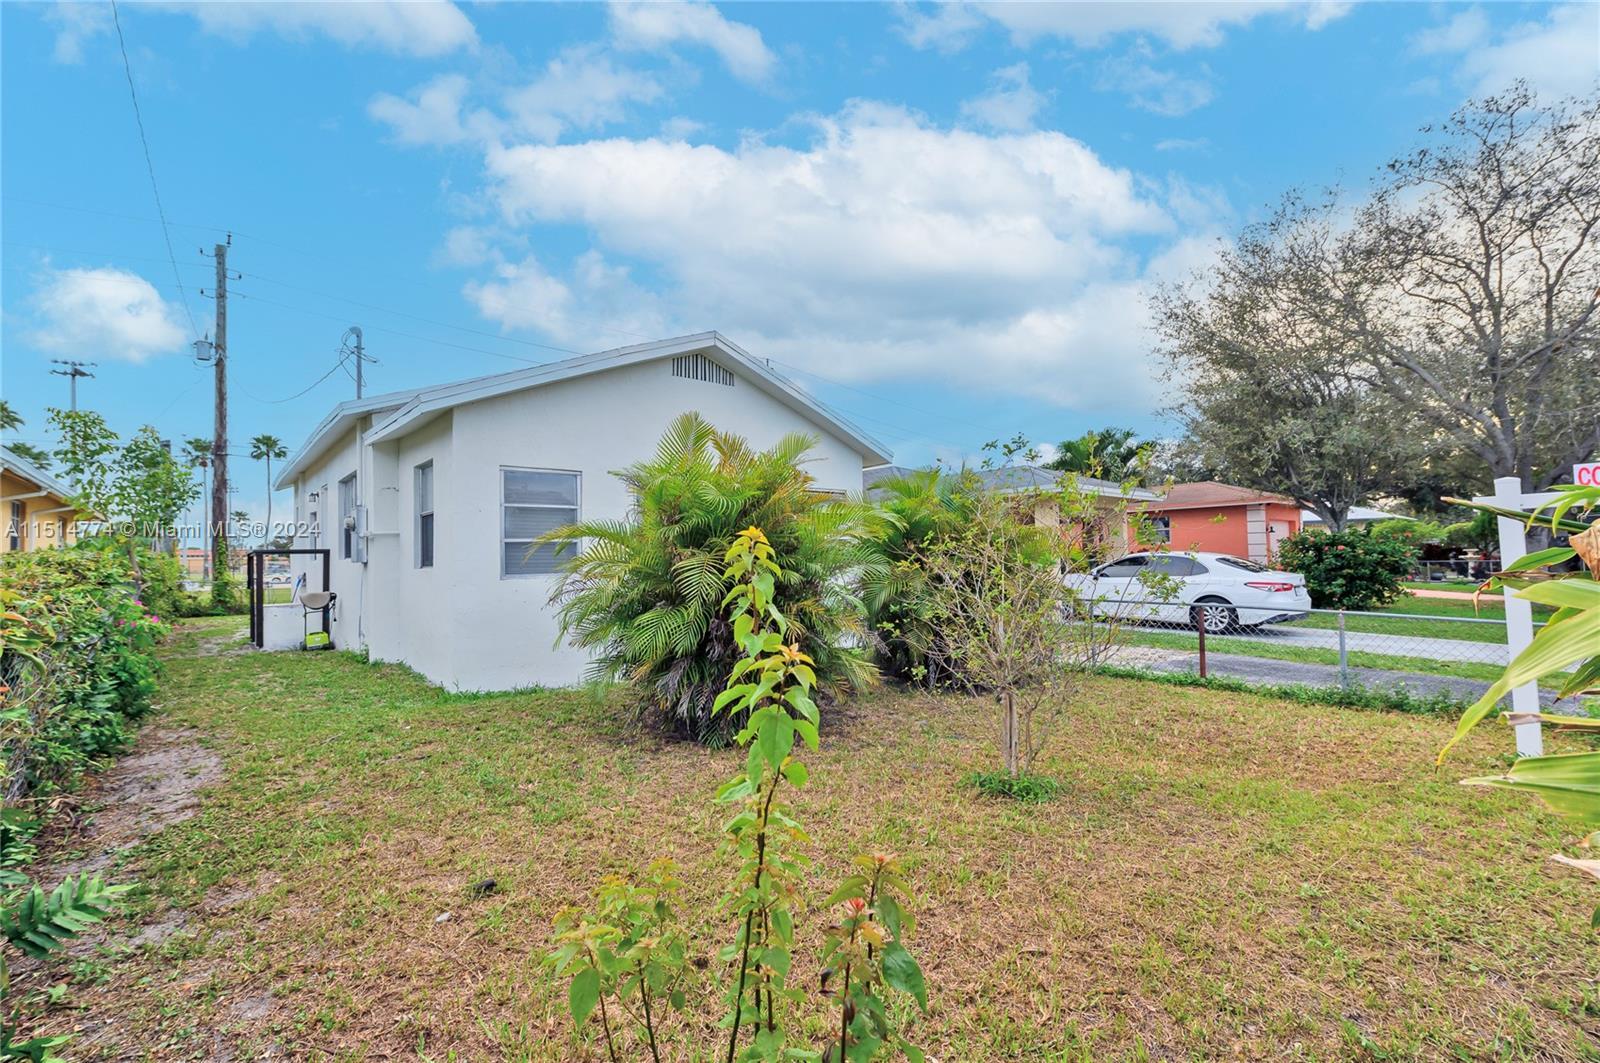 Welcome to this single family home, conveniently located nearby FLL international airport, the Semin